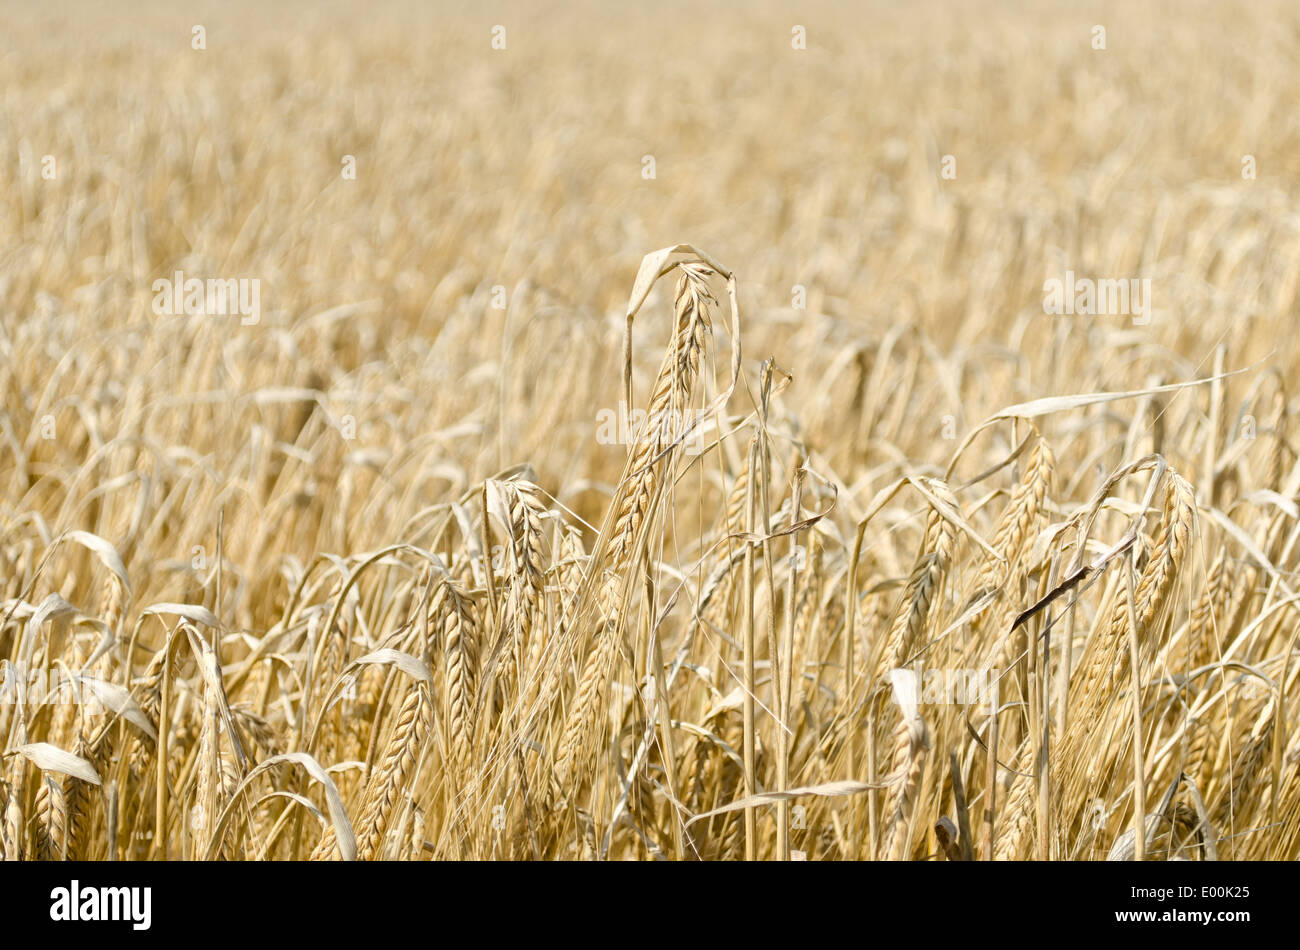 Background of a wheat field, ready for harvest. Stock Photo